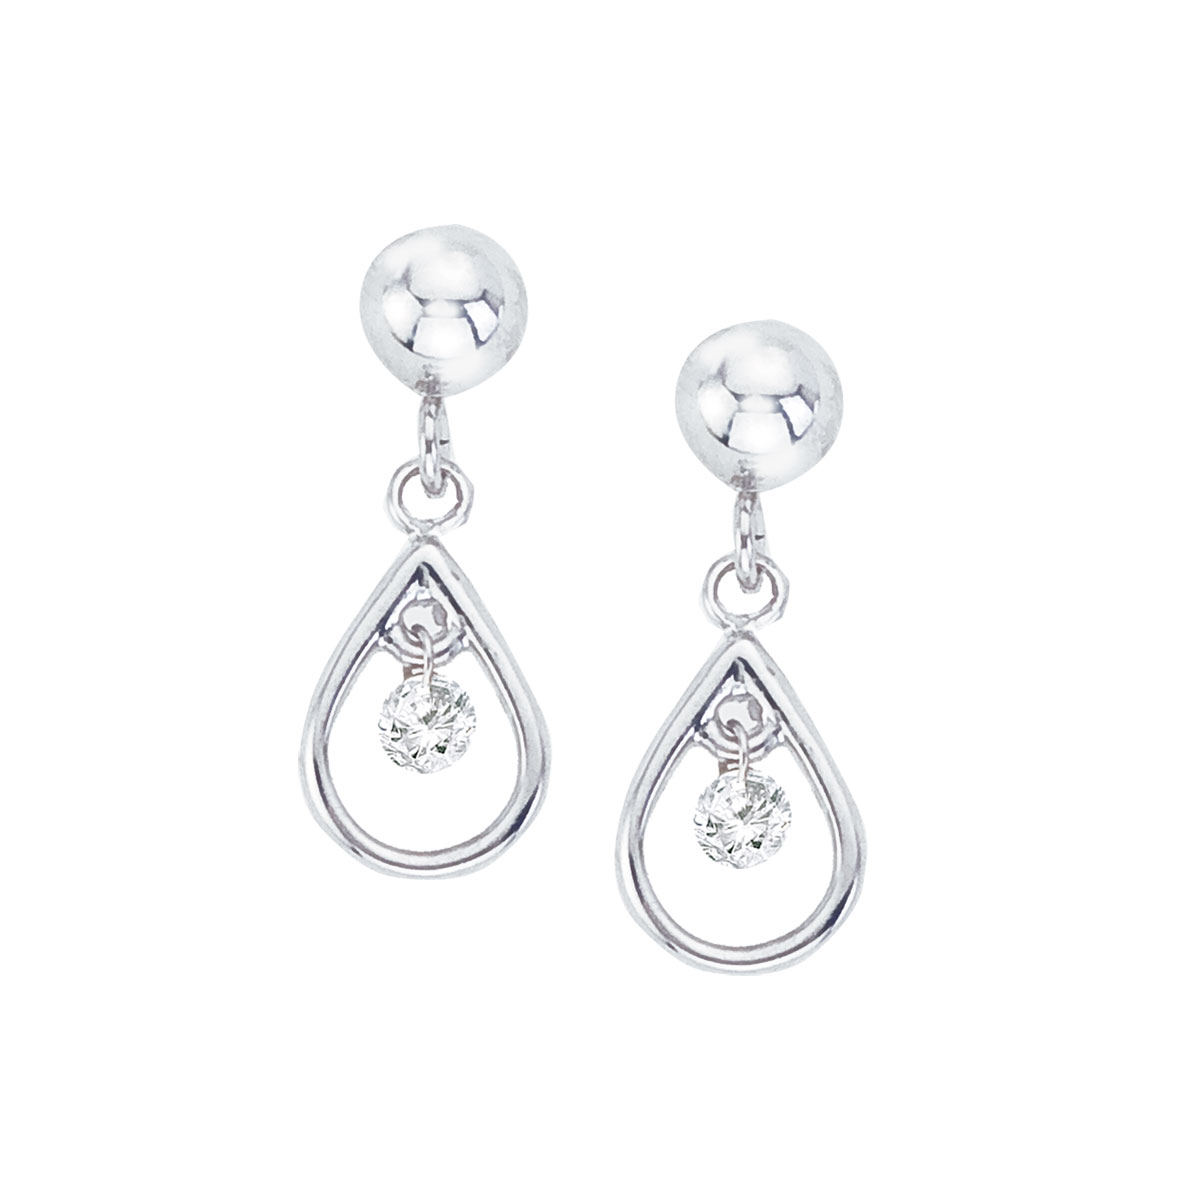 10k white gold Dashing Diamonds dangle earrings with shimmering stones that dance with every heartbeat for a beautiful and bright look.